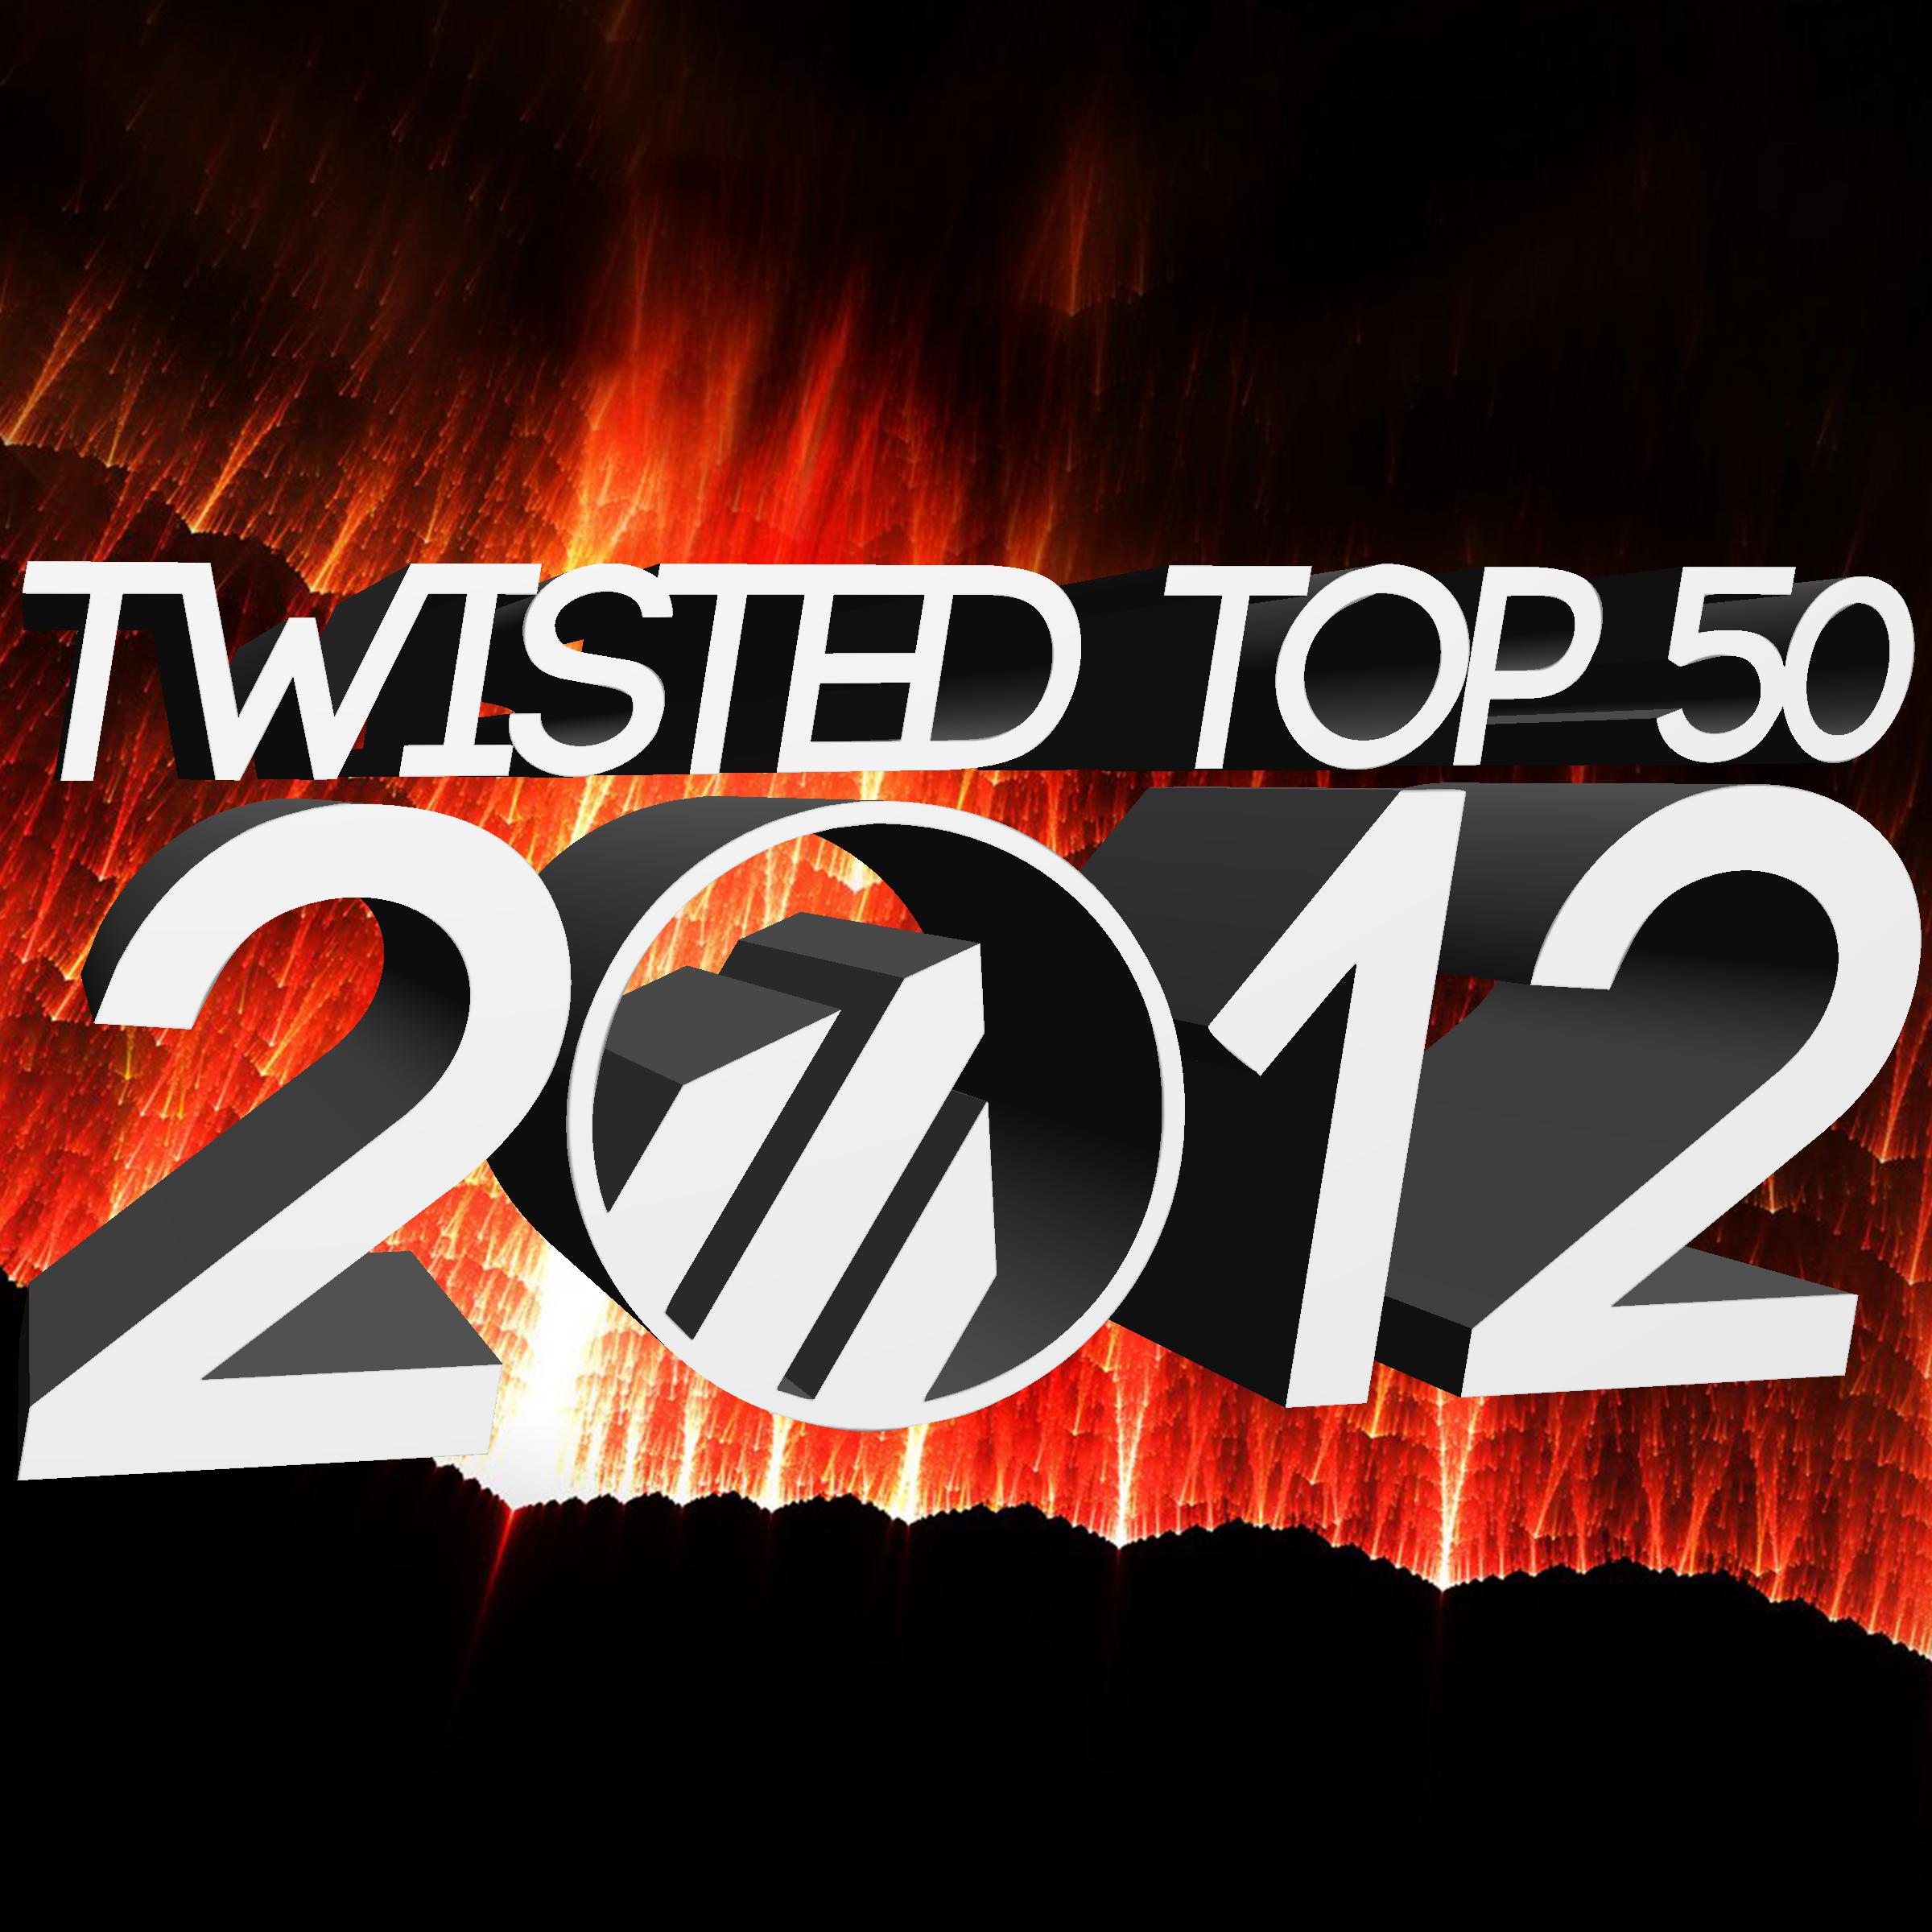 Twisted Top 50 2012